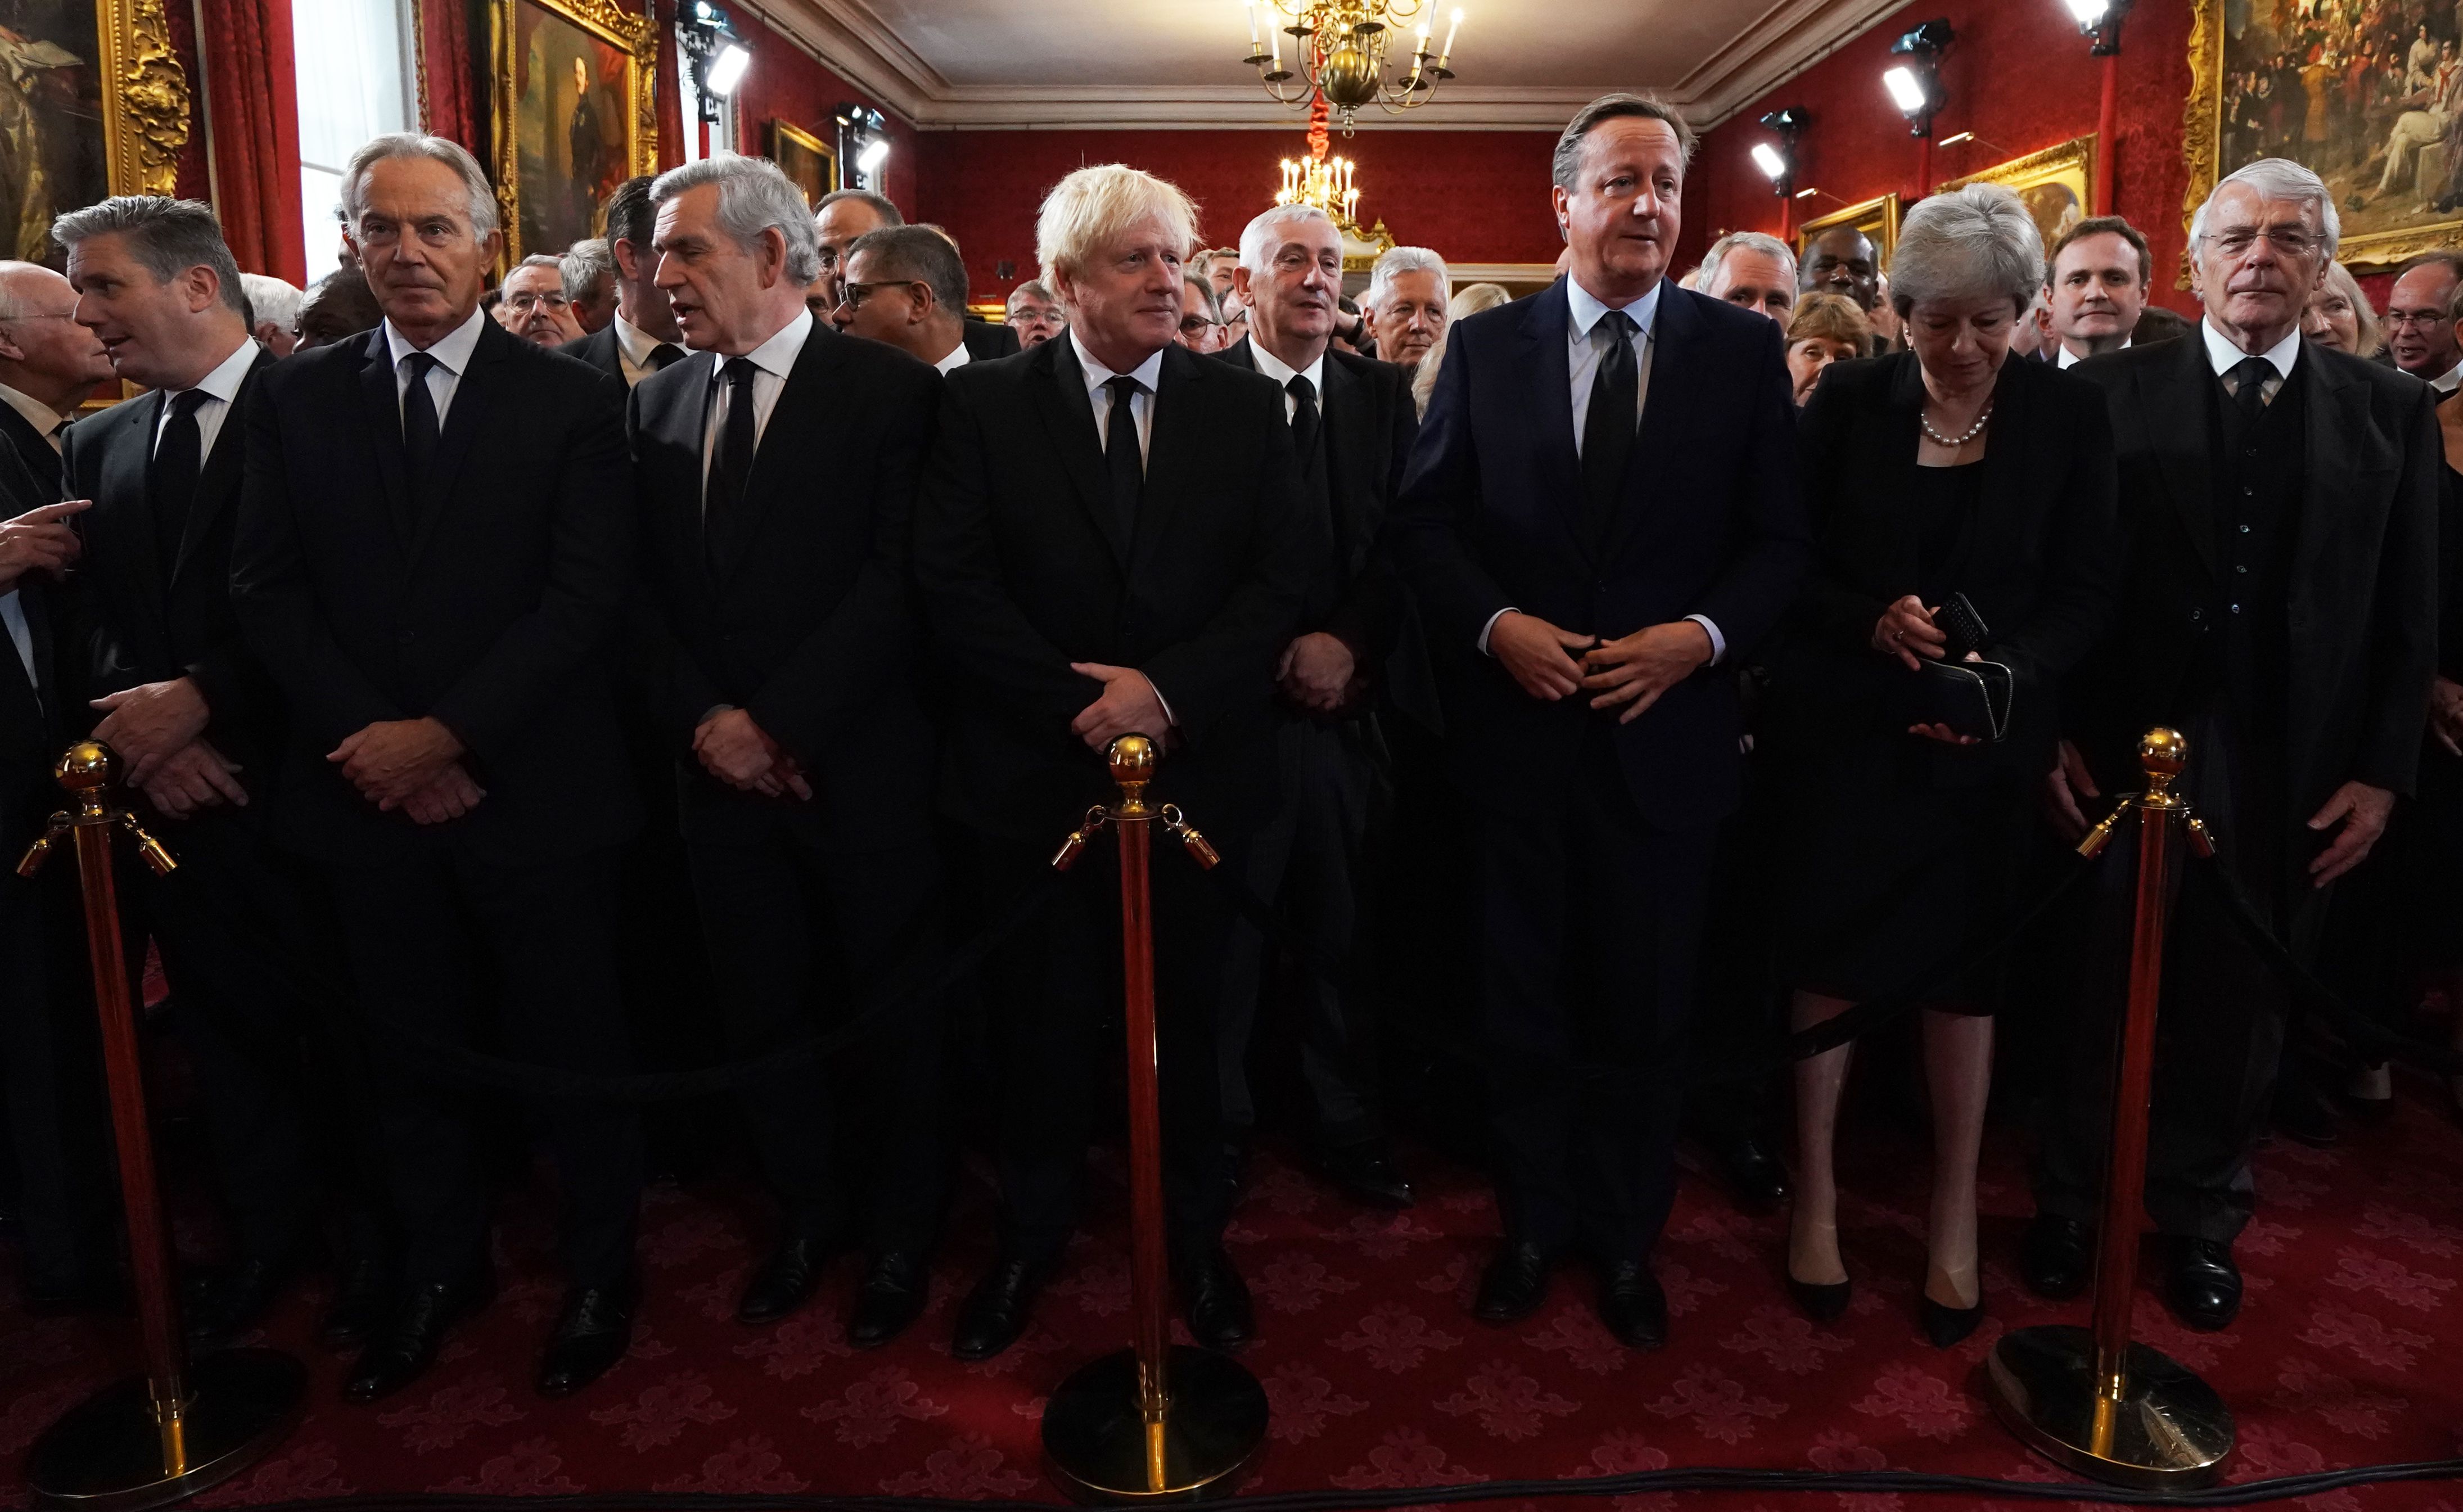 <p>In an extraordinary gathering of political force, Labour leader Sir Keir Starmer (left) stands next to six former British prime ministers -- Tony Blair, Gordon Brown, Boris Johnson, David Cameron, Theresa May and Sir John Major -- ahead of the Accession Council ceremony at St. James's Palace in London, where King Charles III was formally proclaimed monarch on Sept. 10, 2022.</p>